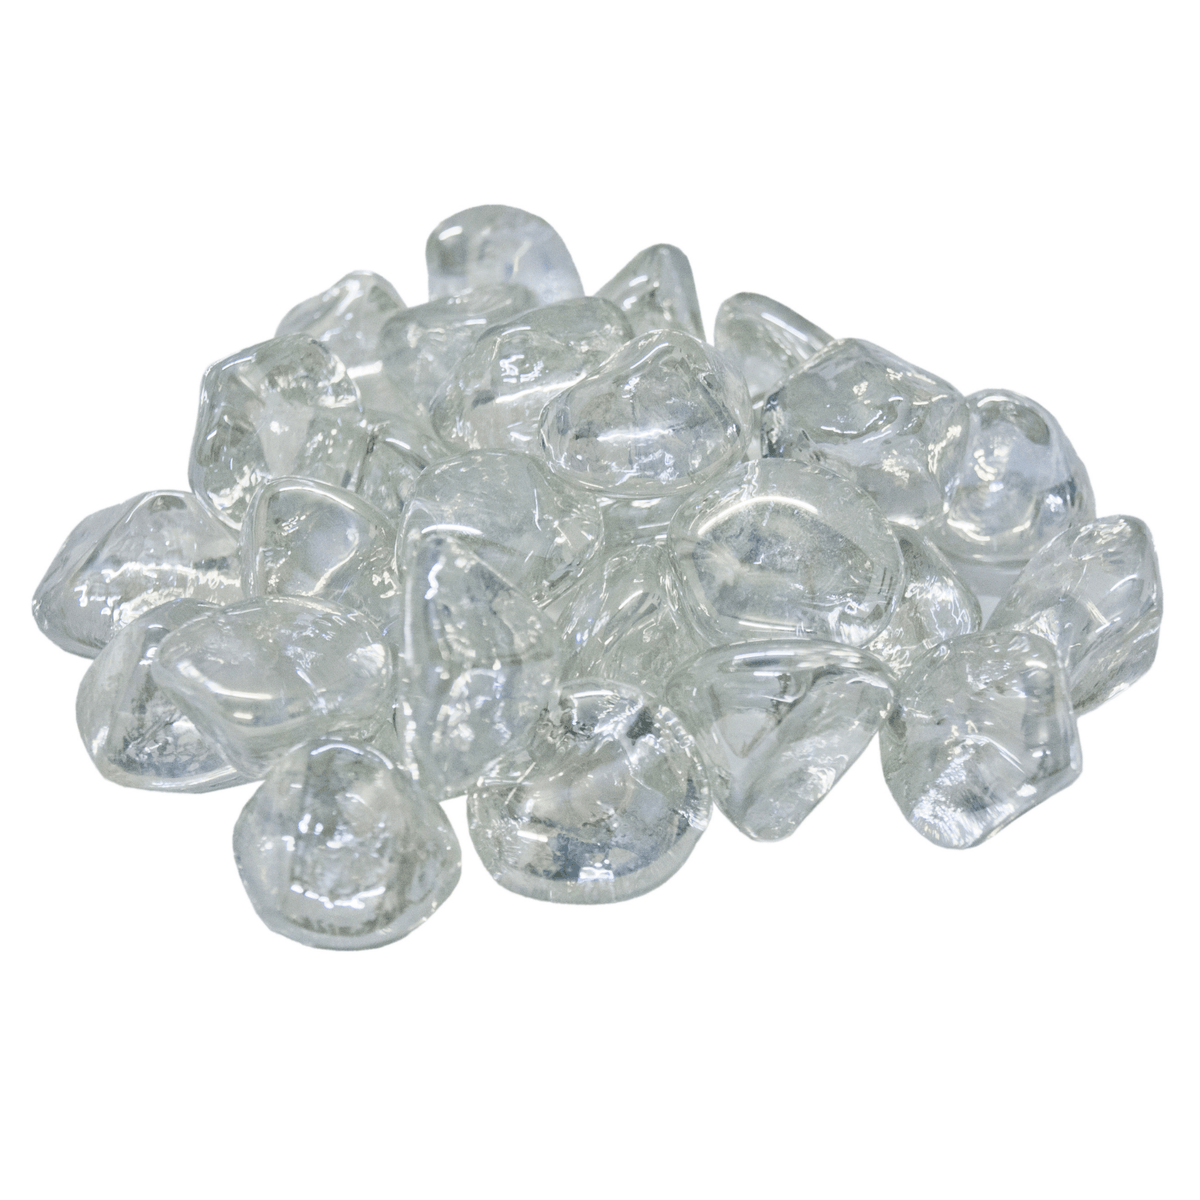 American Fyre Designs Accessories Clear / 5 lb. Package American Fyre Designs Diamond Nuggets / Black Luster, Clear, Deep Black, Emerald, Pacific Blue, Rose, or Steel Blue